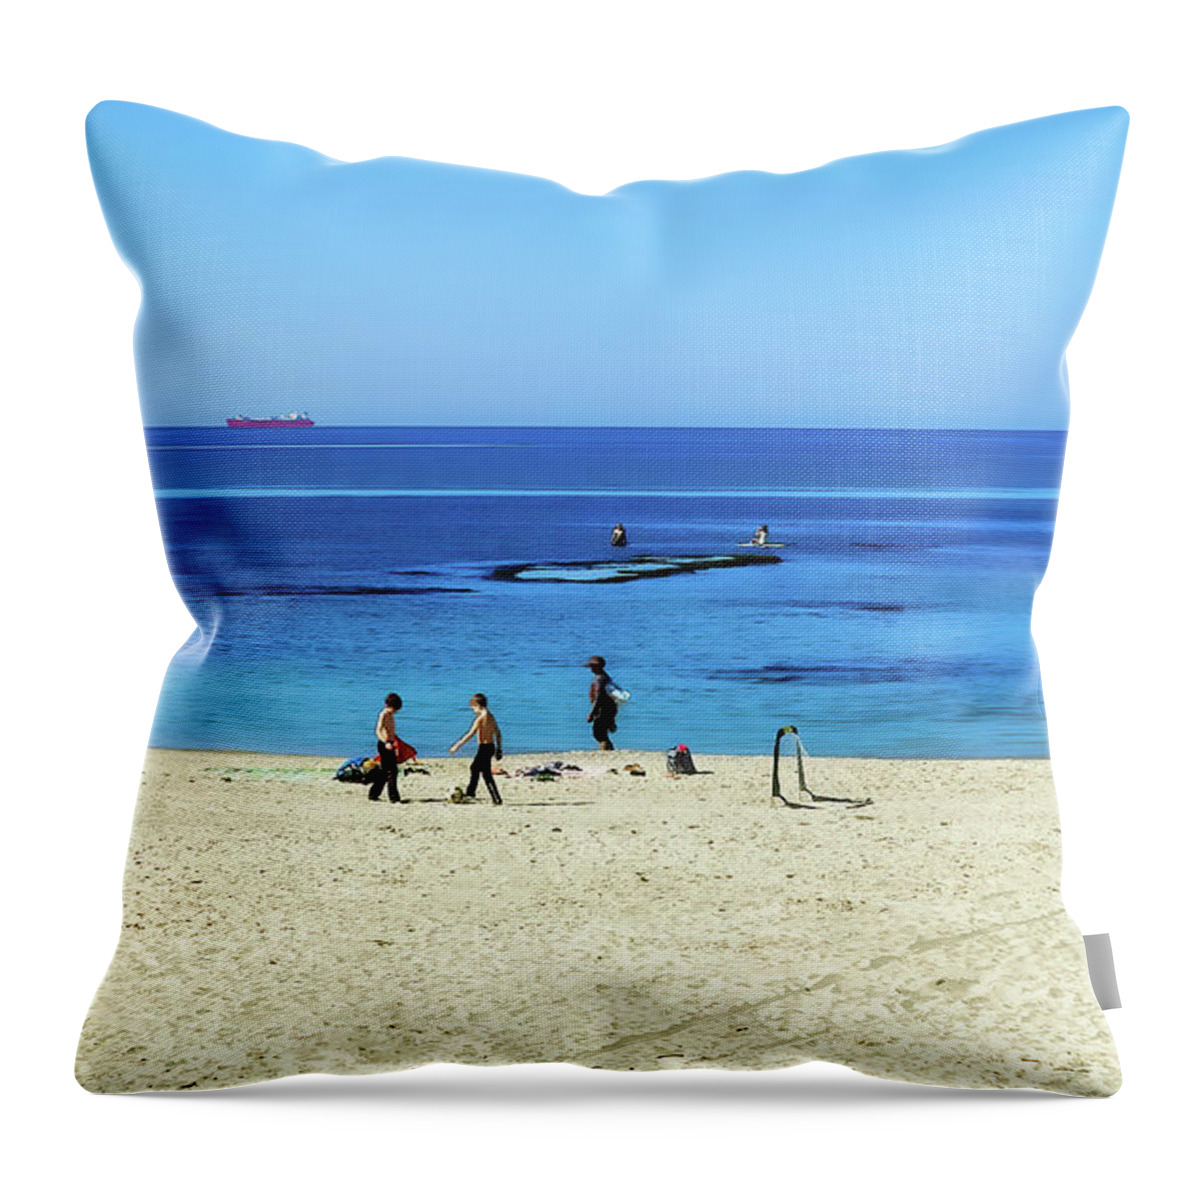 Andreas Gursky Throw Pillow featuring the photograph At Mikhmoret Beach by Meir Ezrachi